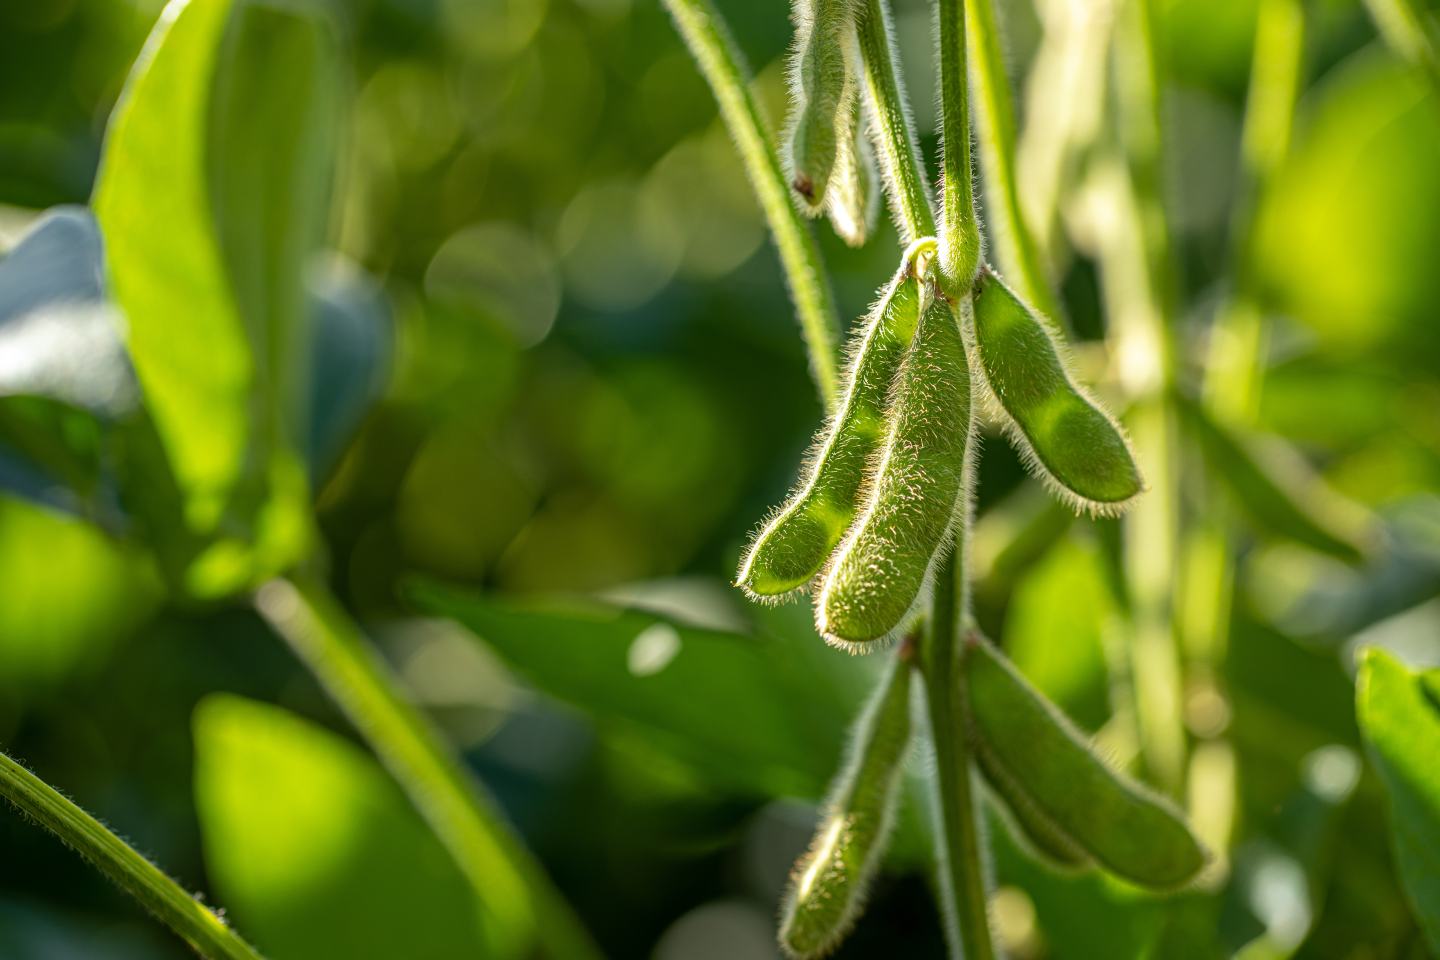 Close up of soybean pods